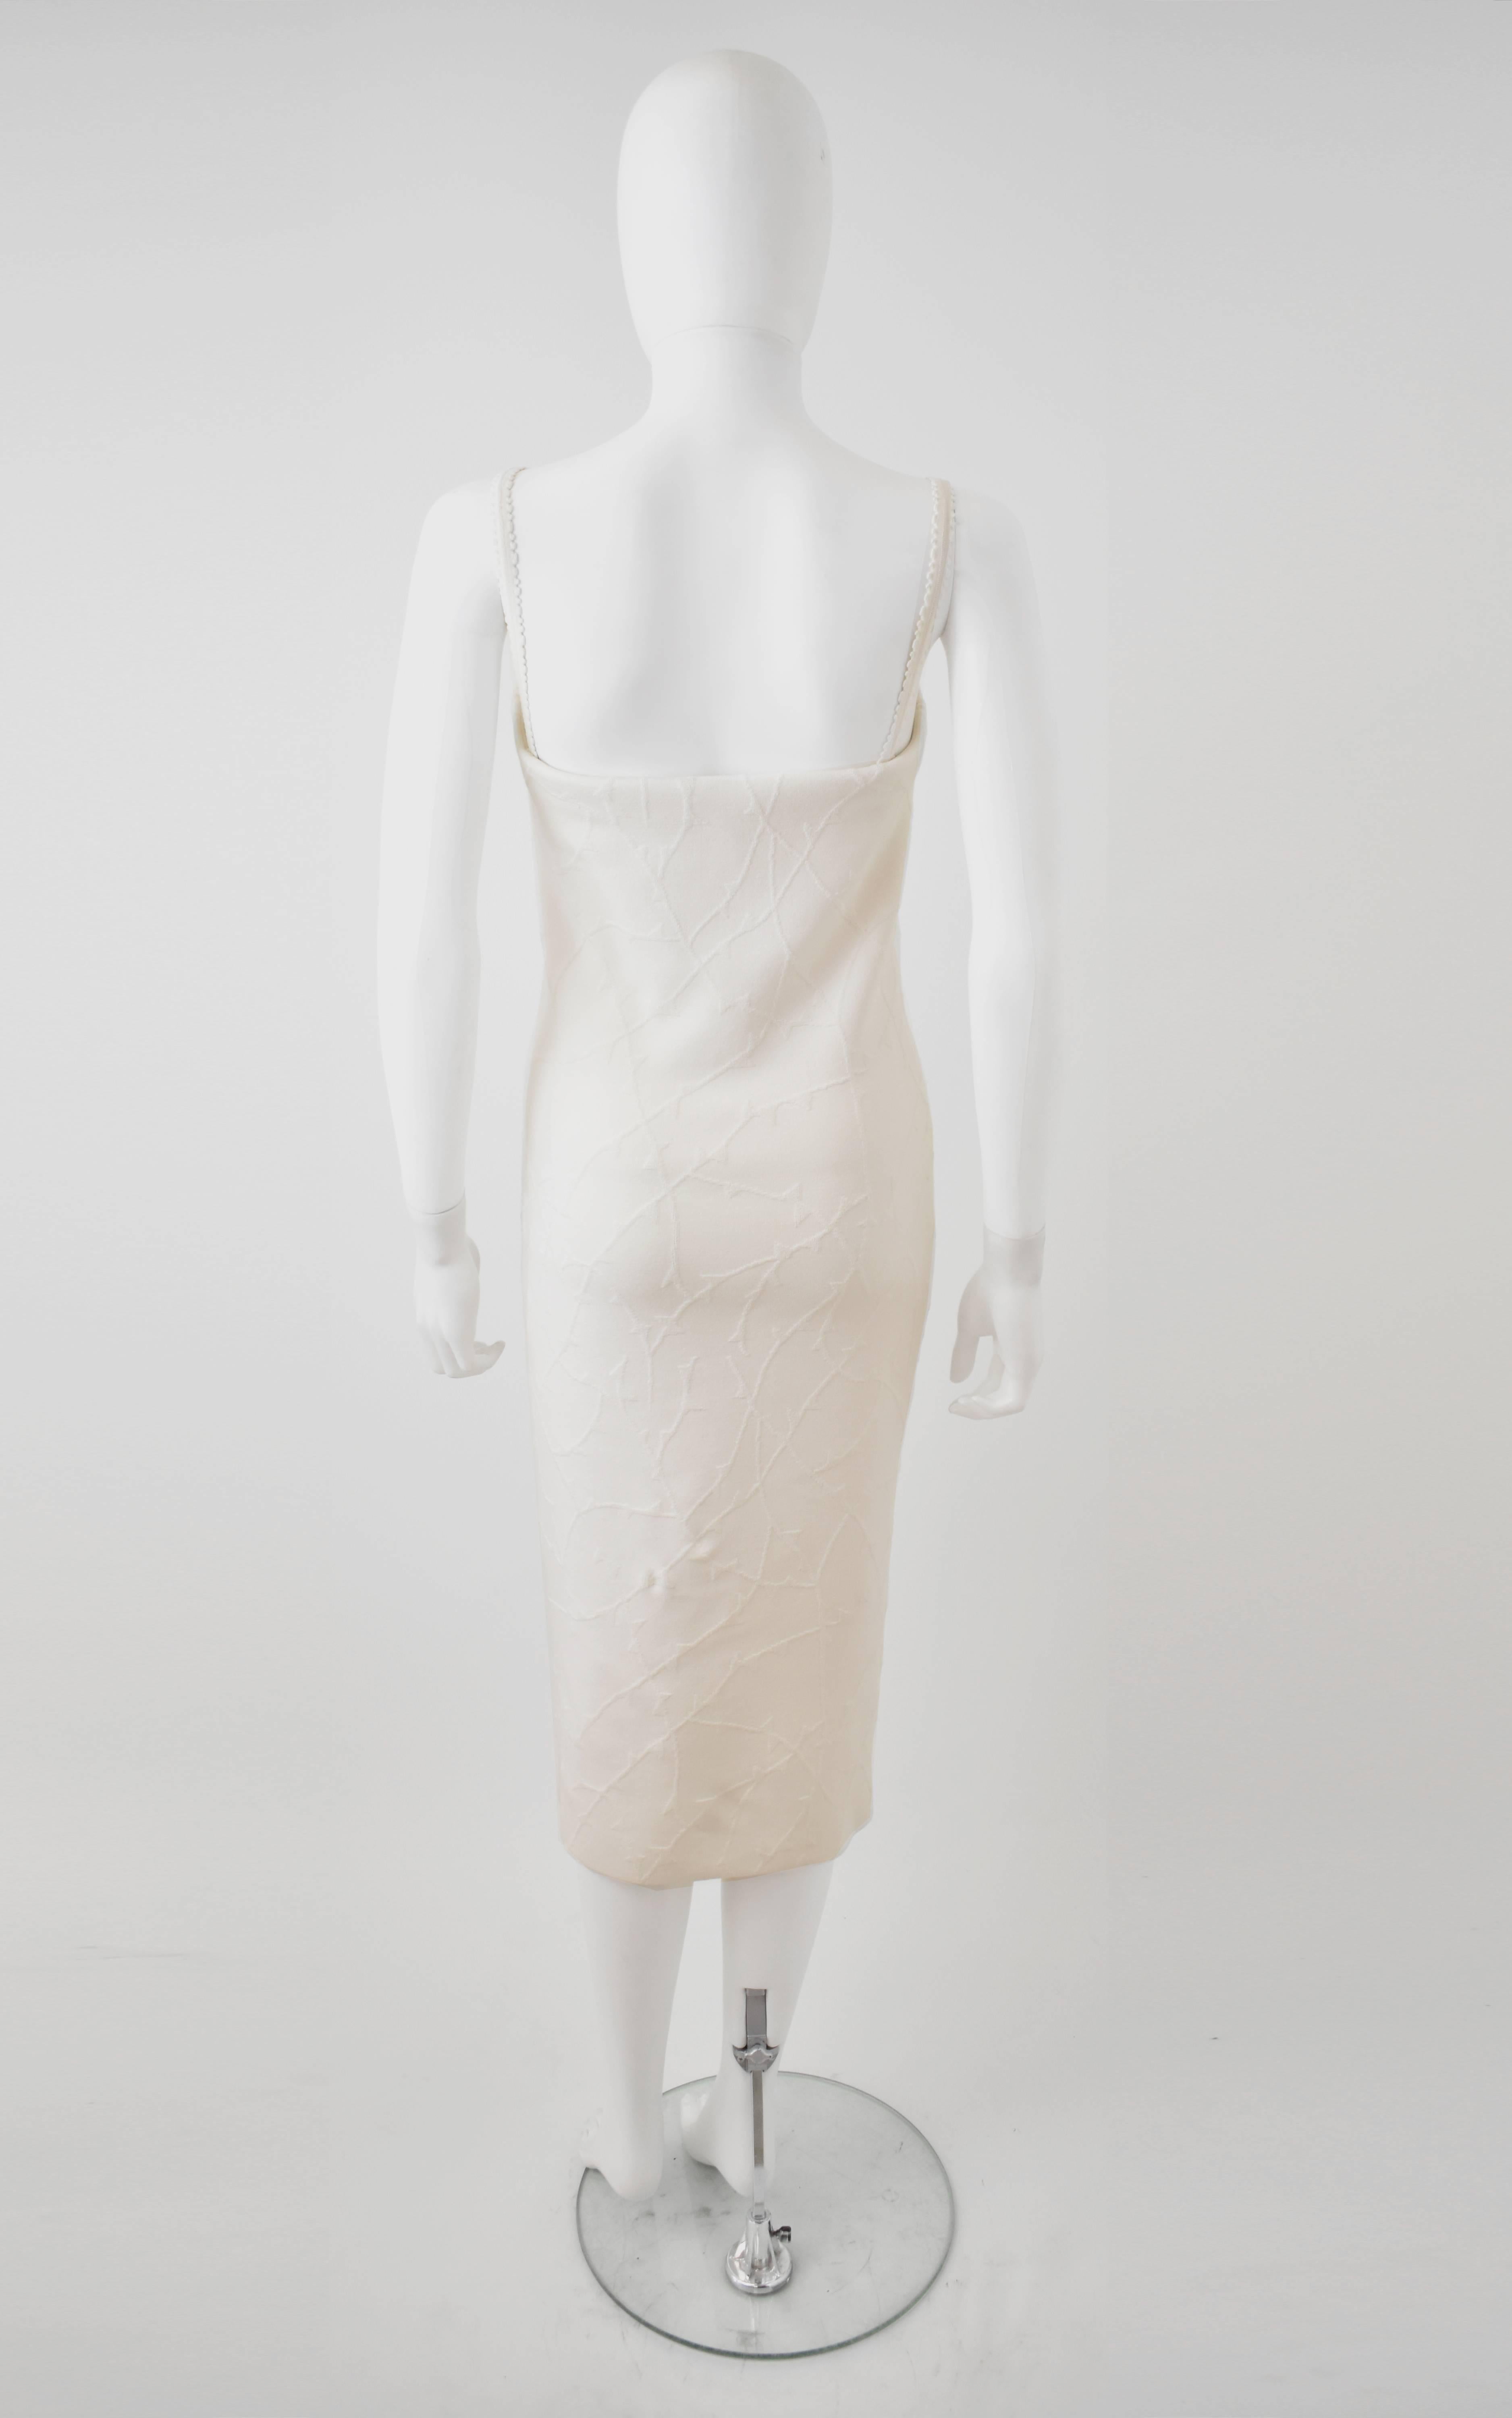 Yves Saint Laurent White Bodycon Dress with Barbed Wire Textured Fabric S/S 2010 1